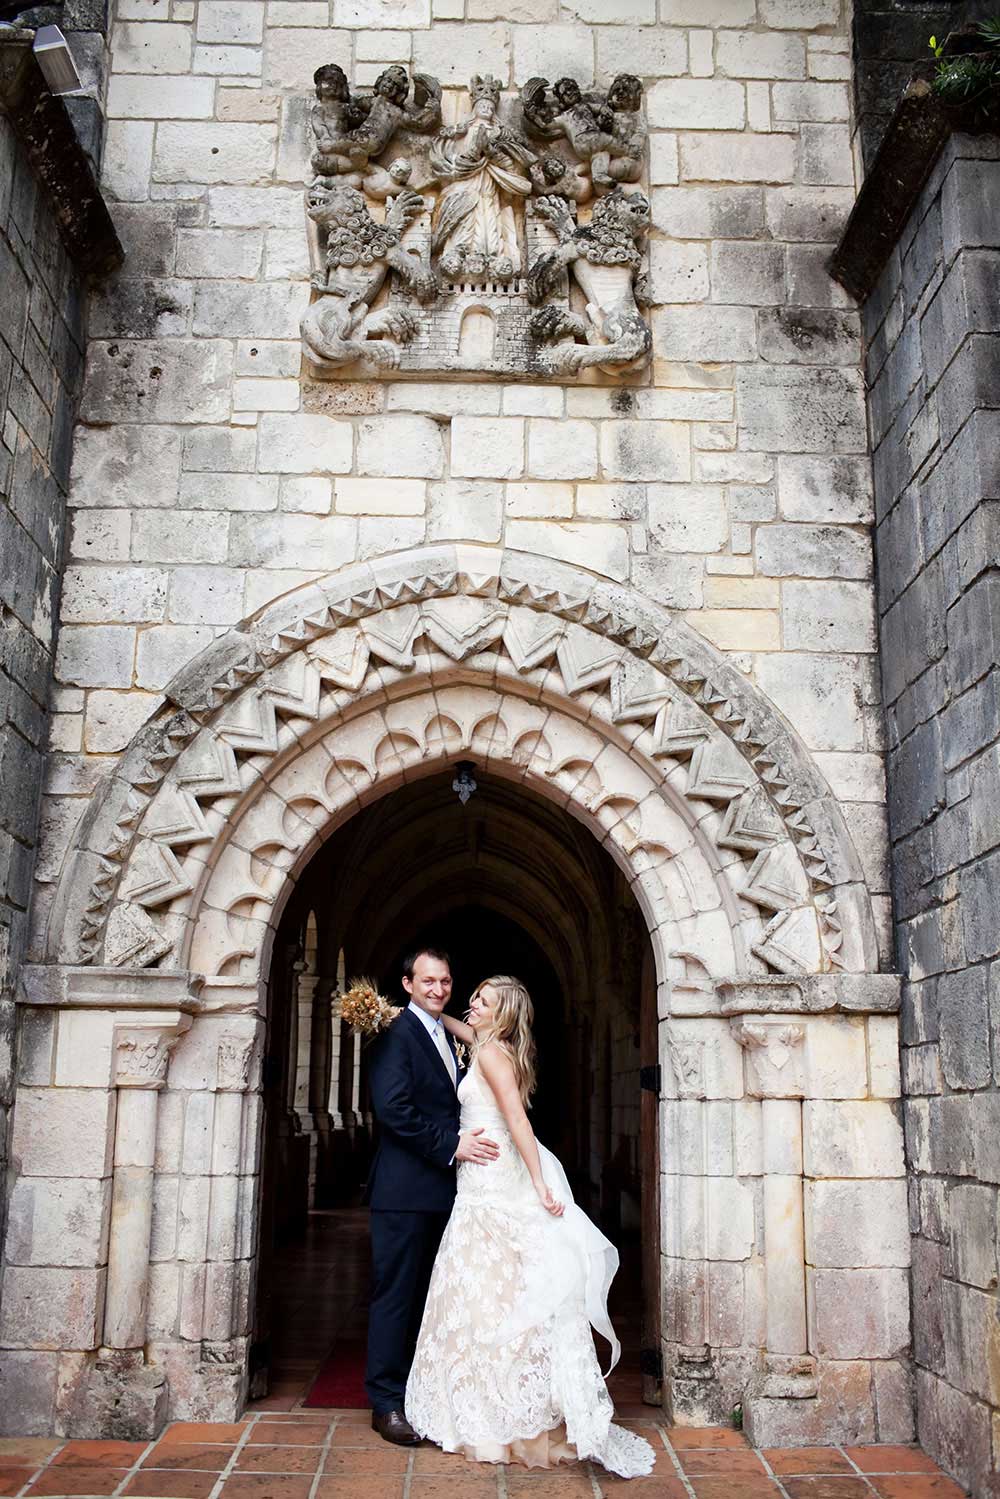 Top Florida Wedding Venues for Florida Destination Weddings | Best Places to Get Married in Florida | Ancient Spanish Monastery